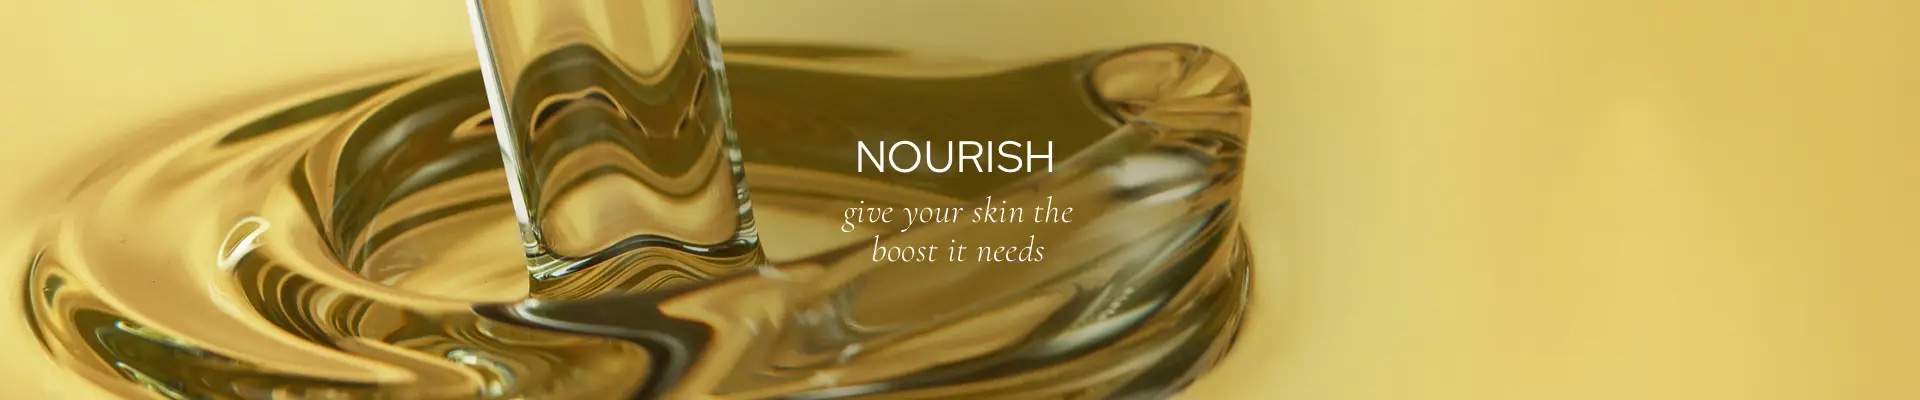 Nourish - give your skin the boost it needs